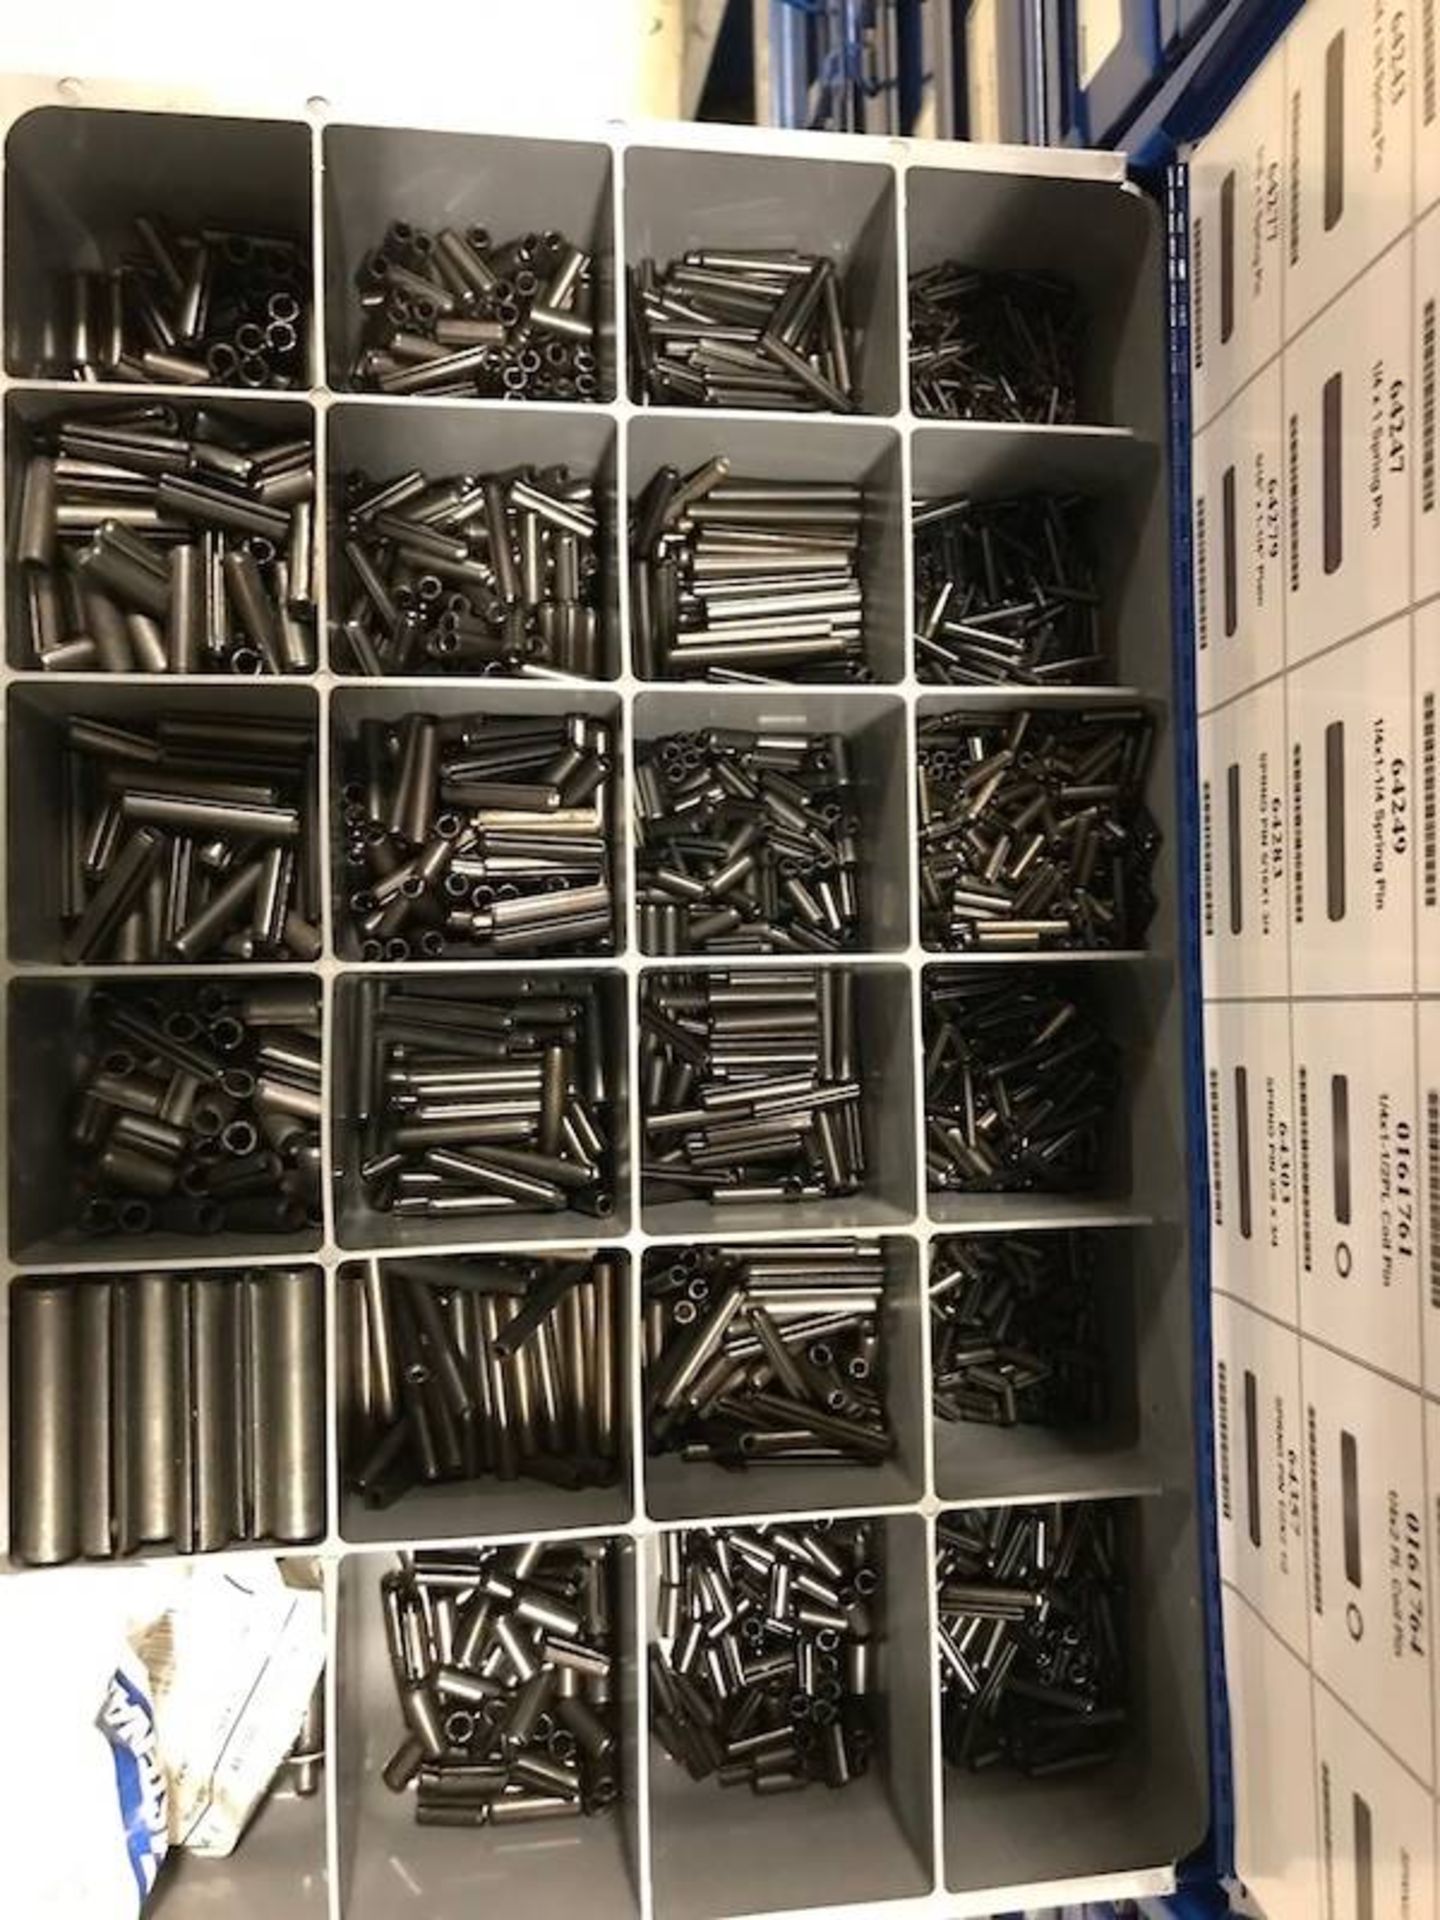 Contents of Fastenal Parts Bins - Image 44 of 70